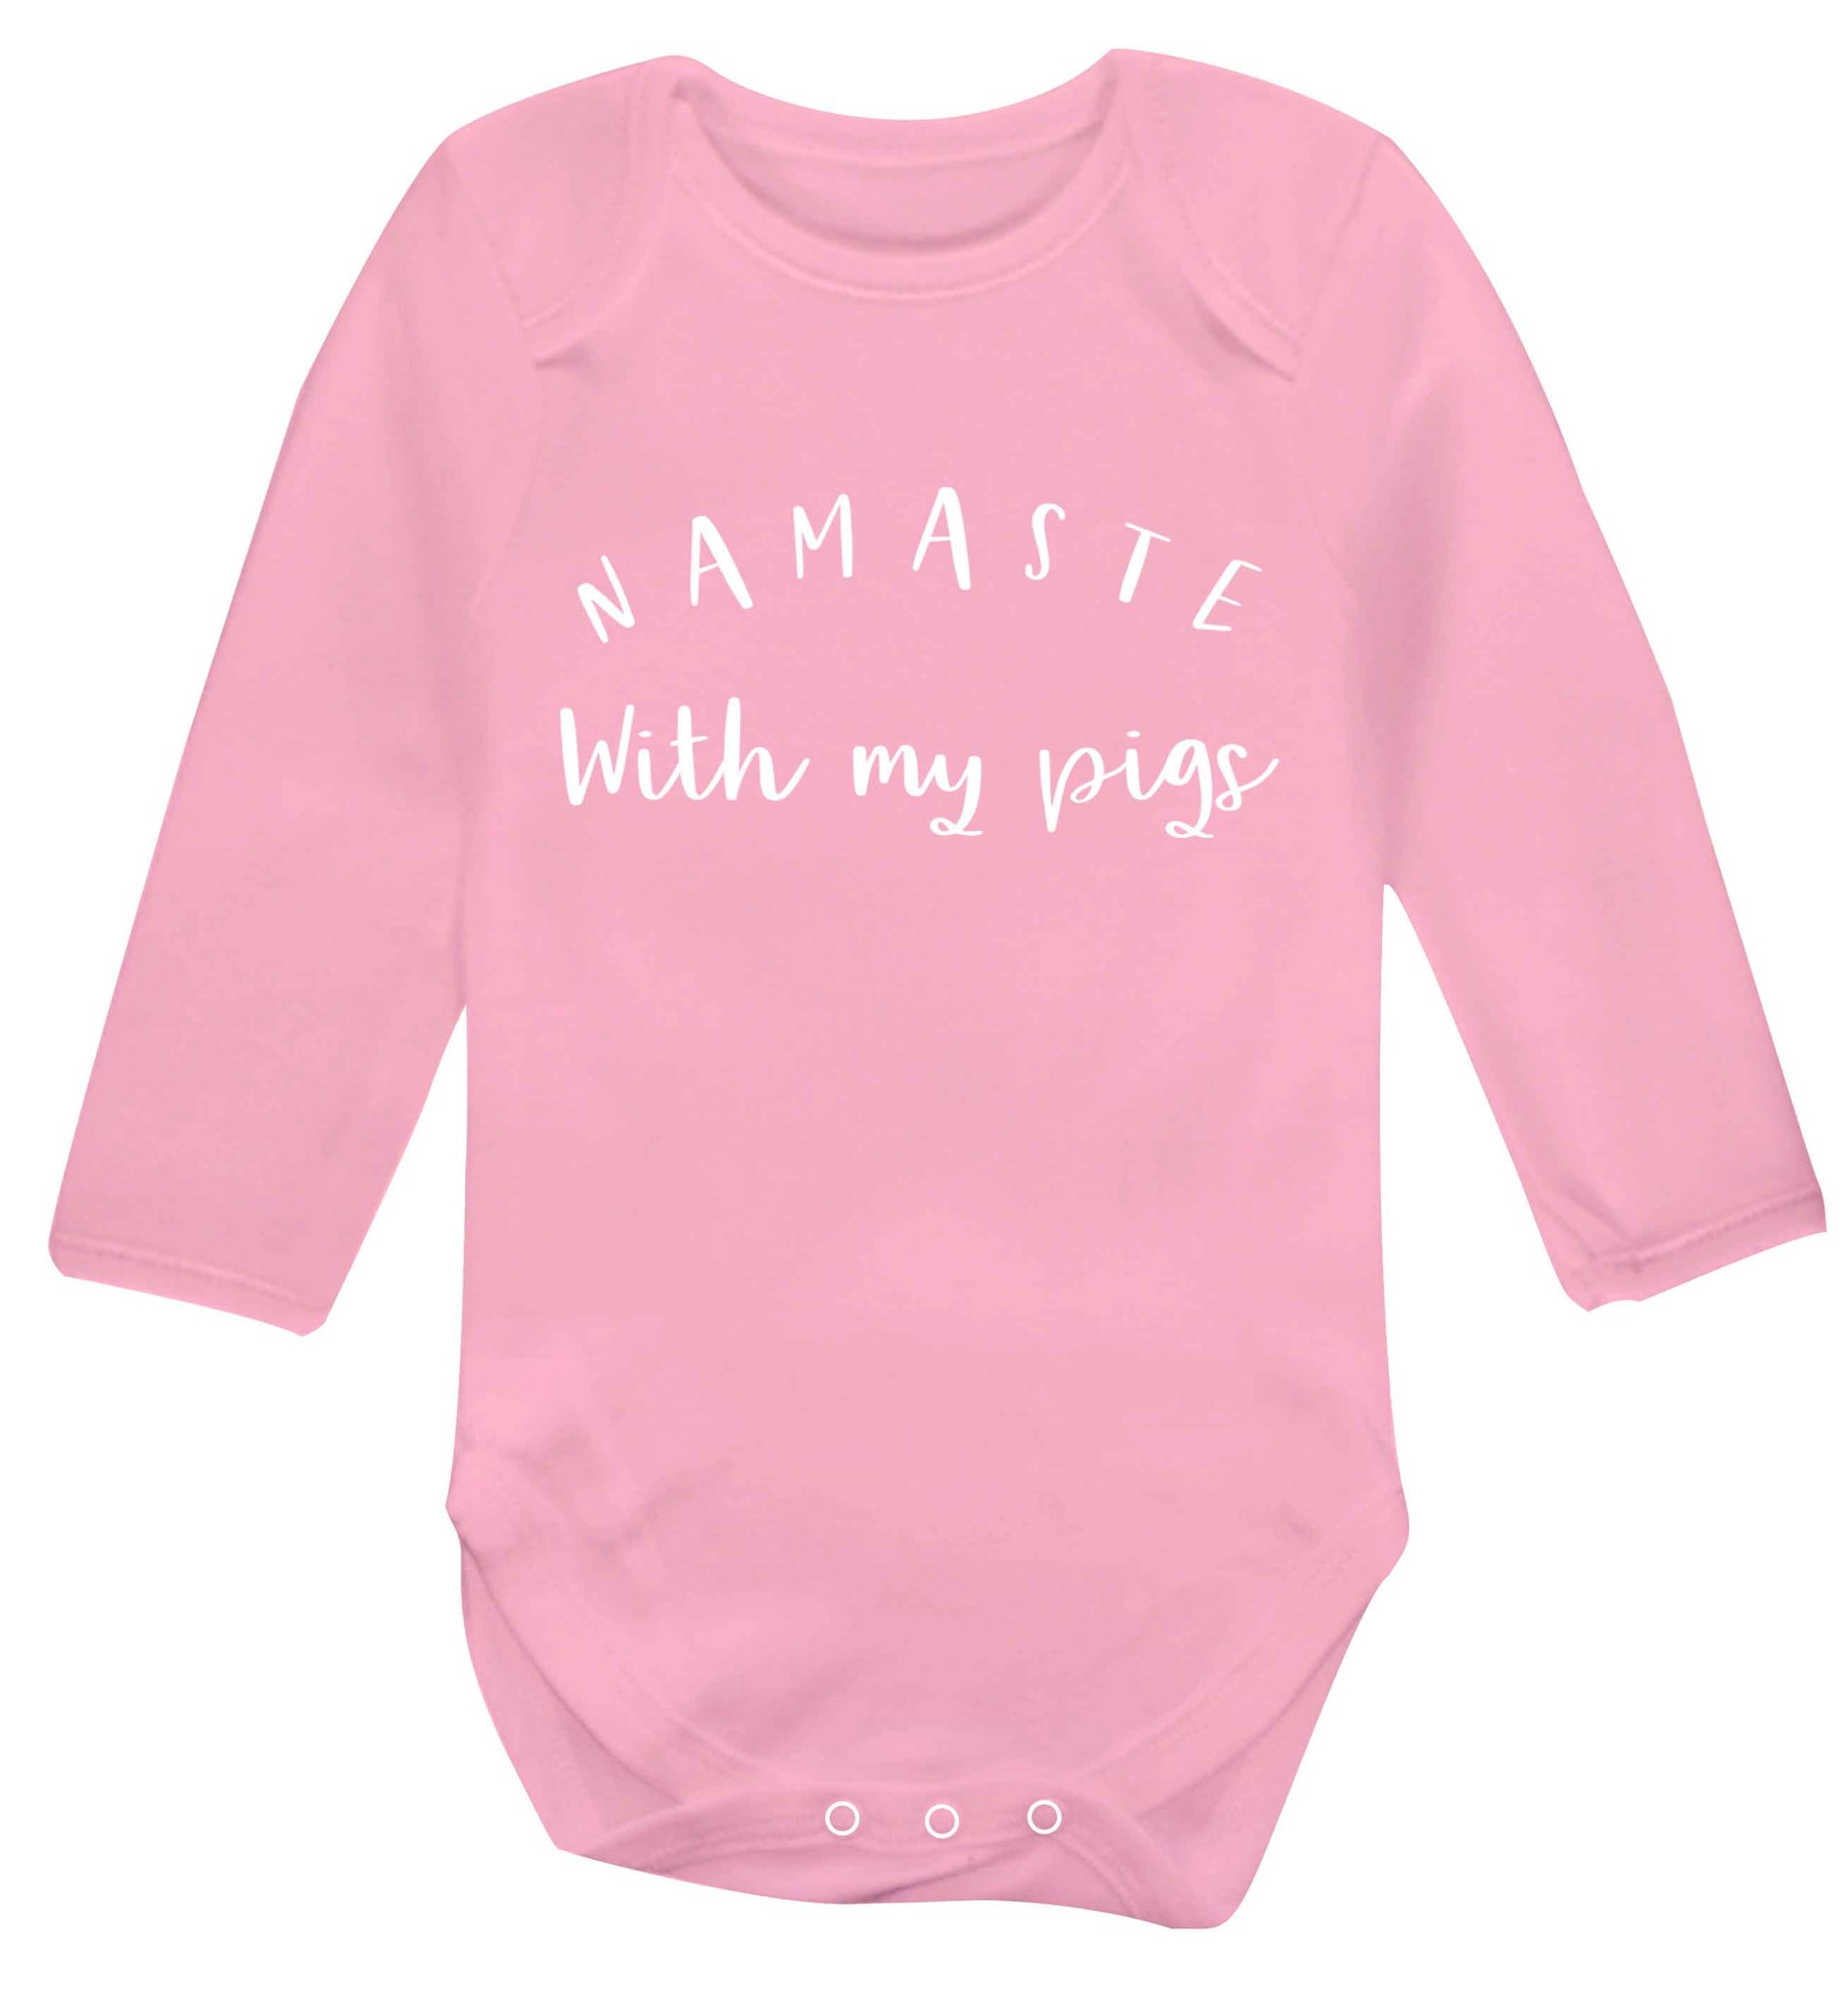 Namaste with my pigs Baby Vest long sleeved pale pink 6-12 months